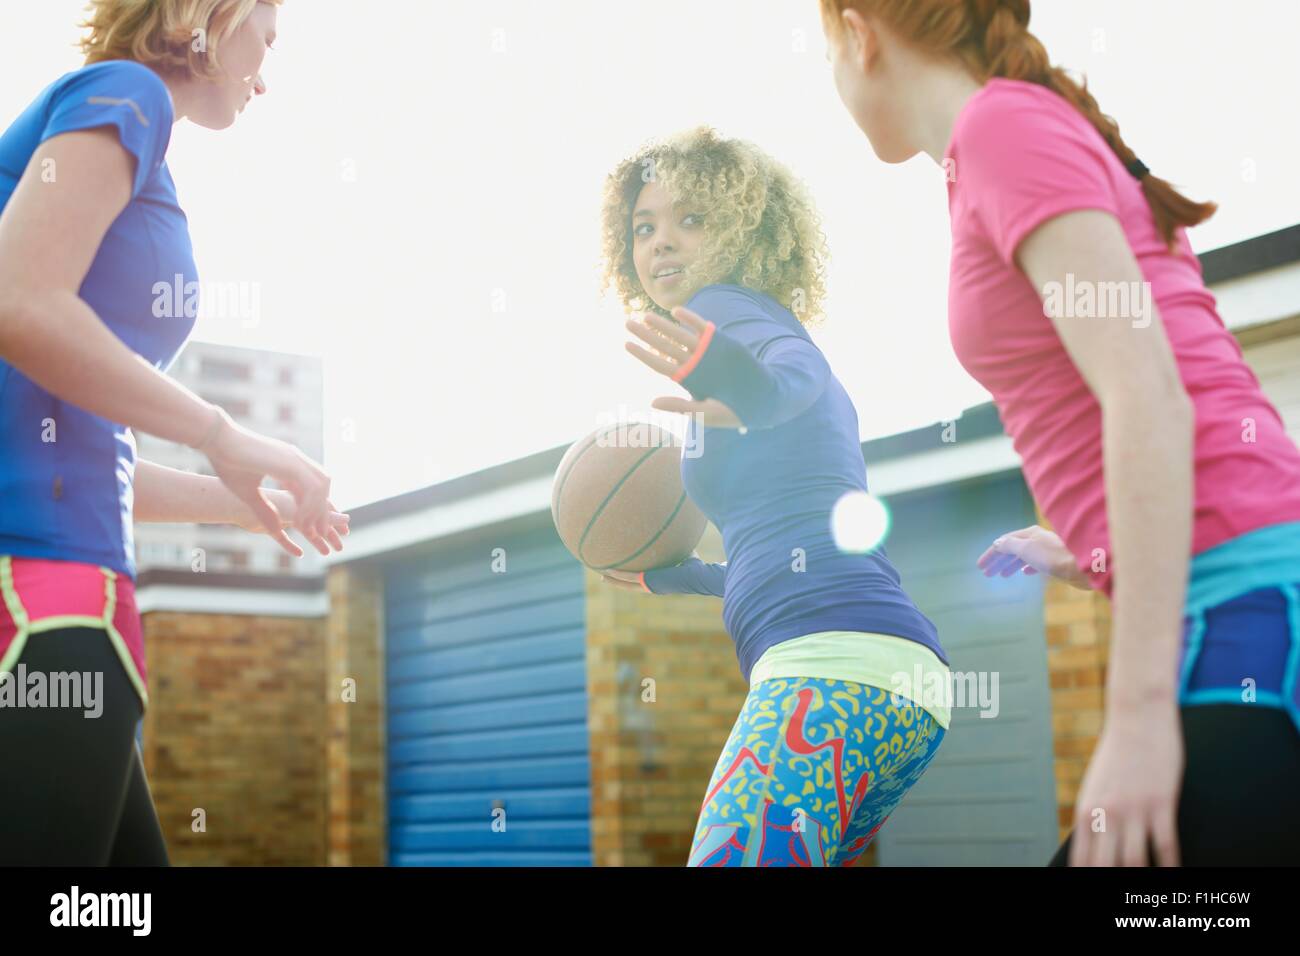 Portrait of three women exercising together playing basketball Stock Photo